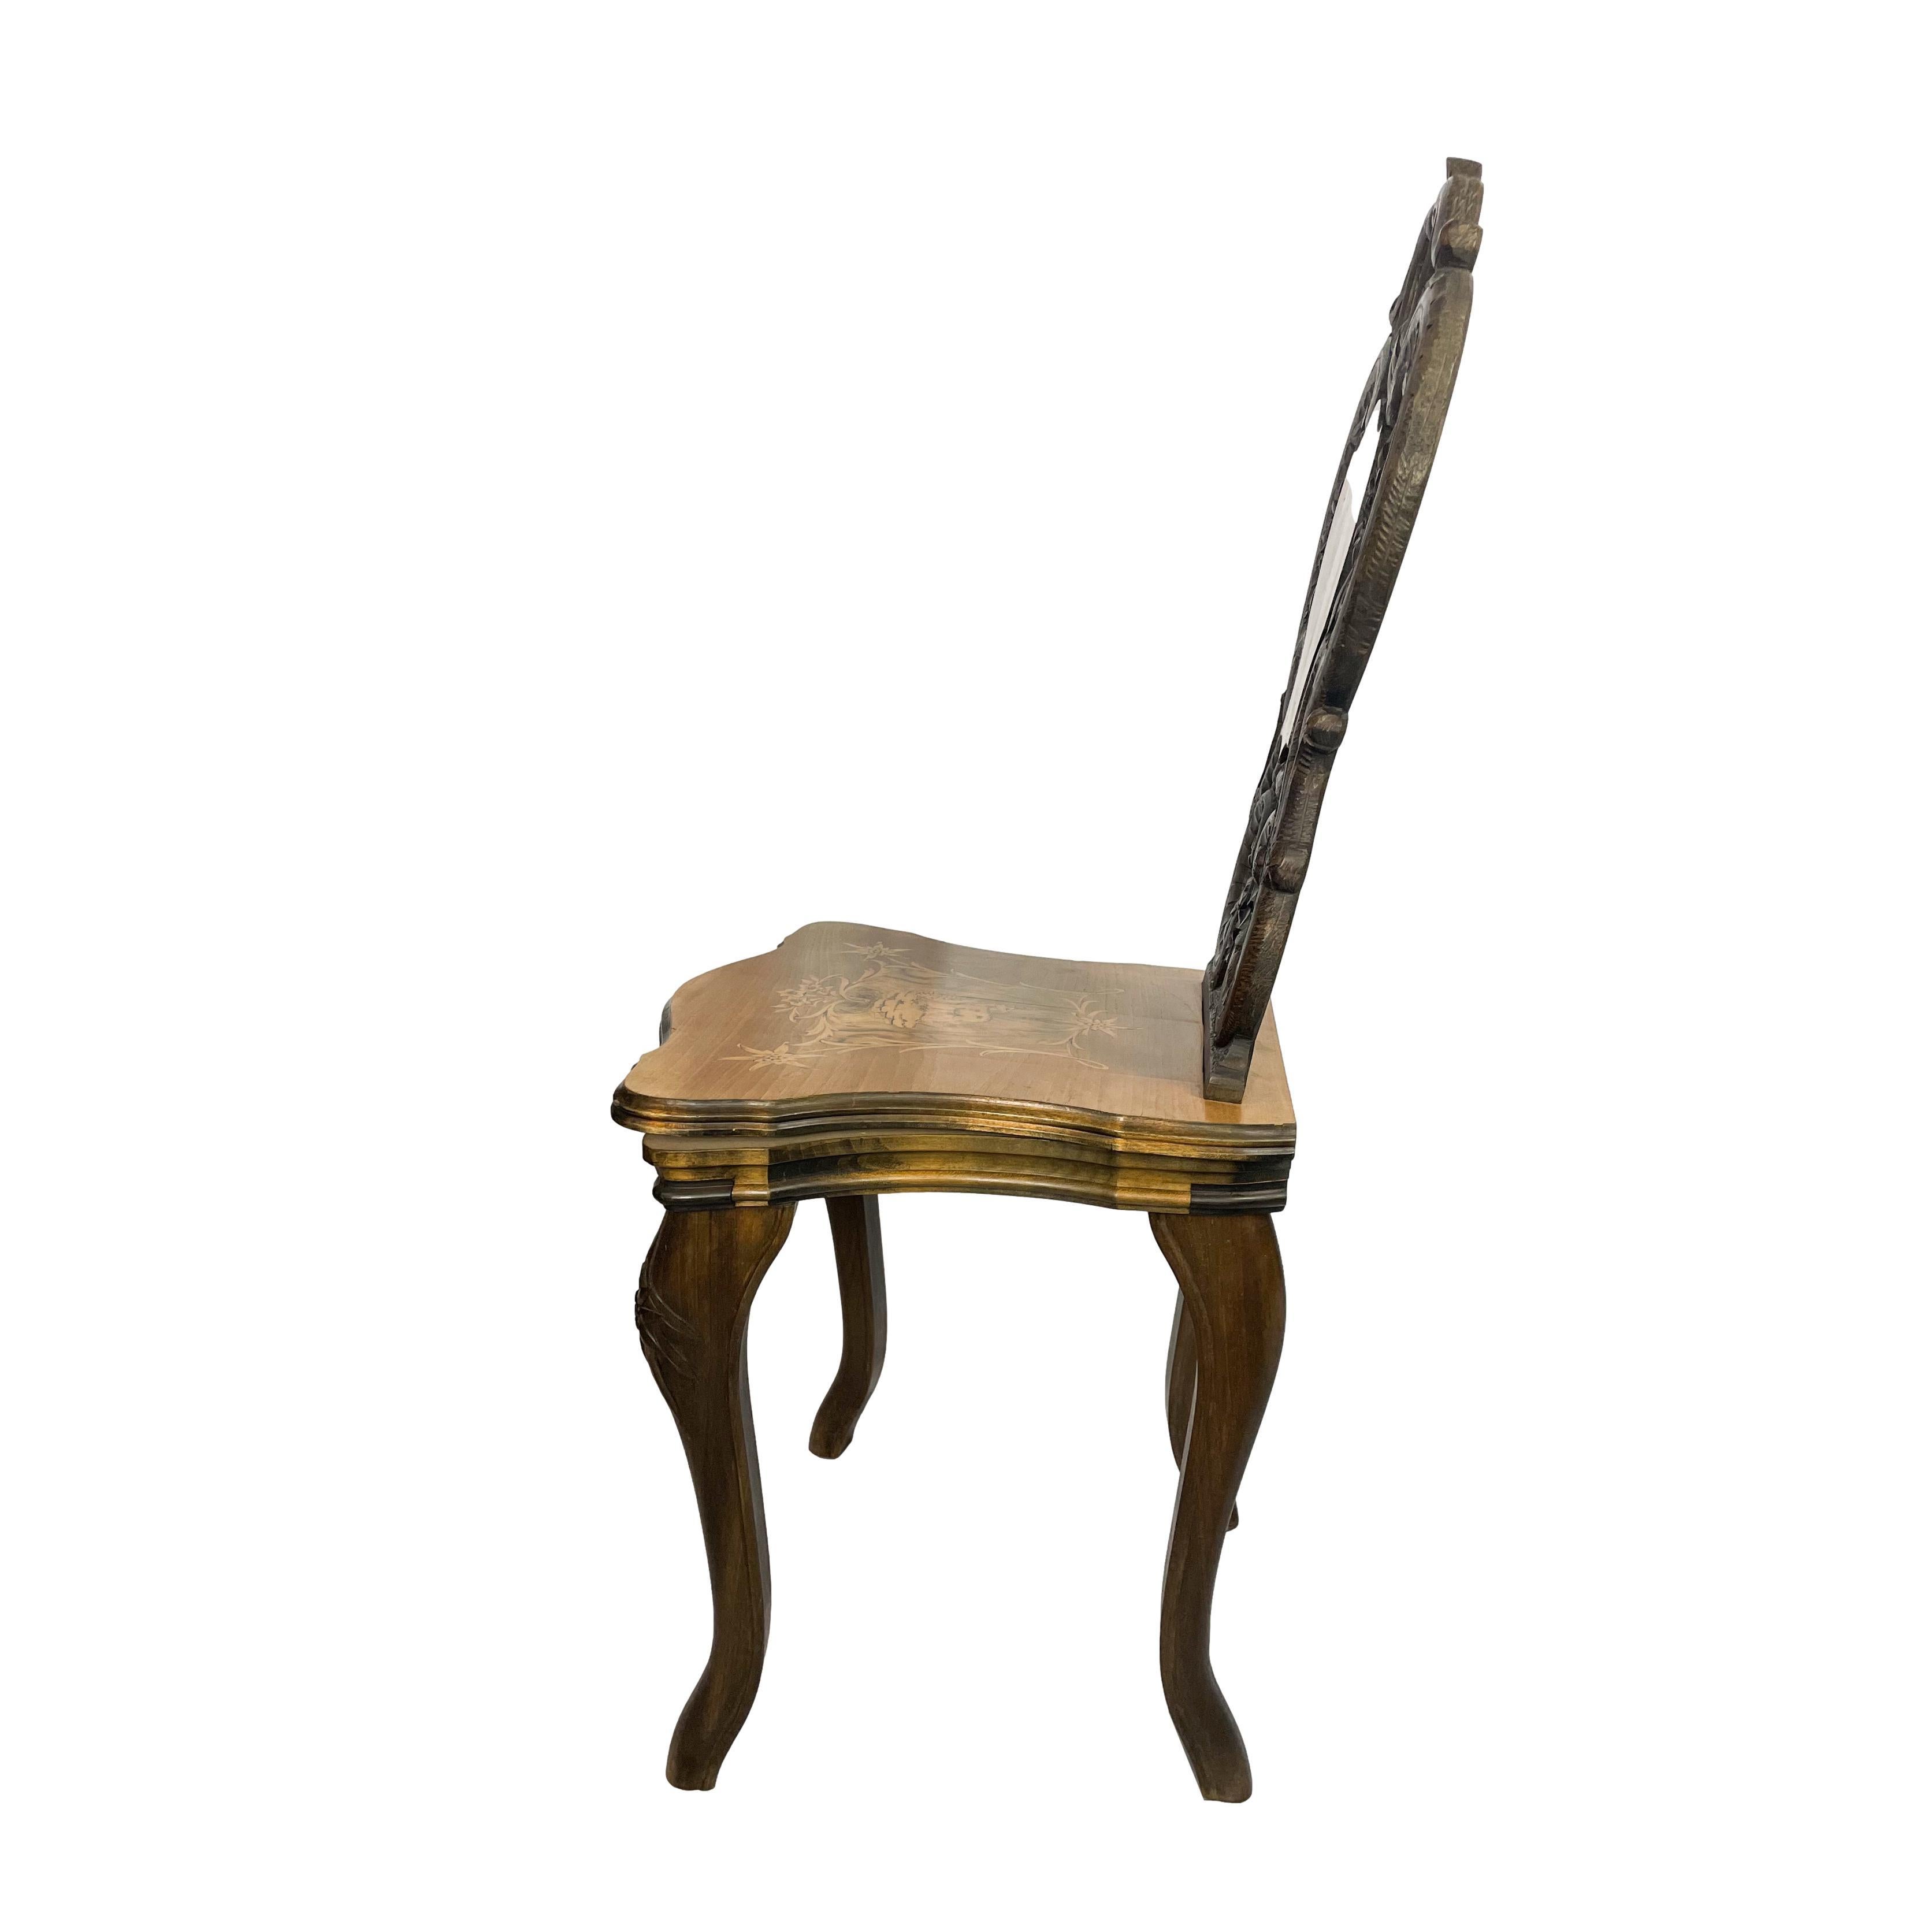 A black forest carved walnut chair, the seat and seatback with intricately inlaid cartouches each depicting an alpine chamois, with carved edelweiss and leaves, with the working music box mechanism under the seat, Brienz, Switzerland, ca. 1900. 
